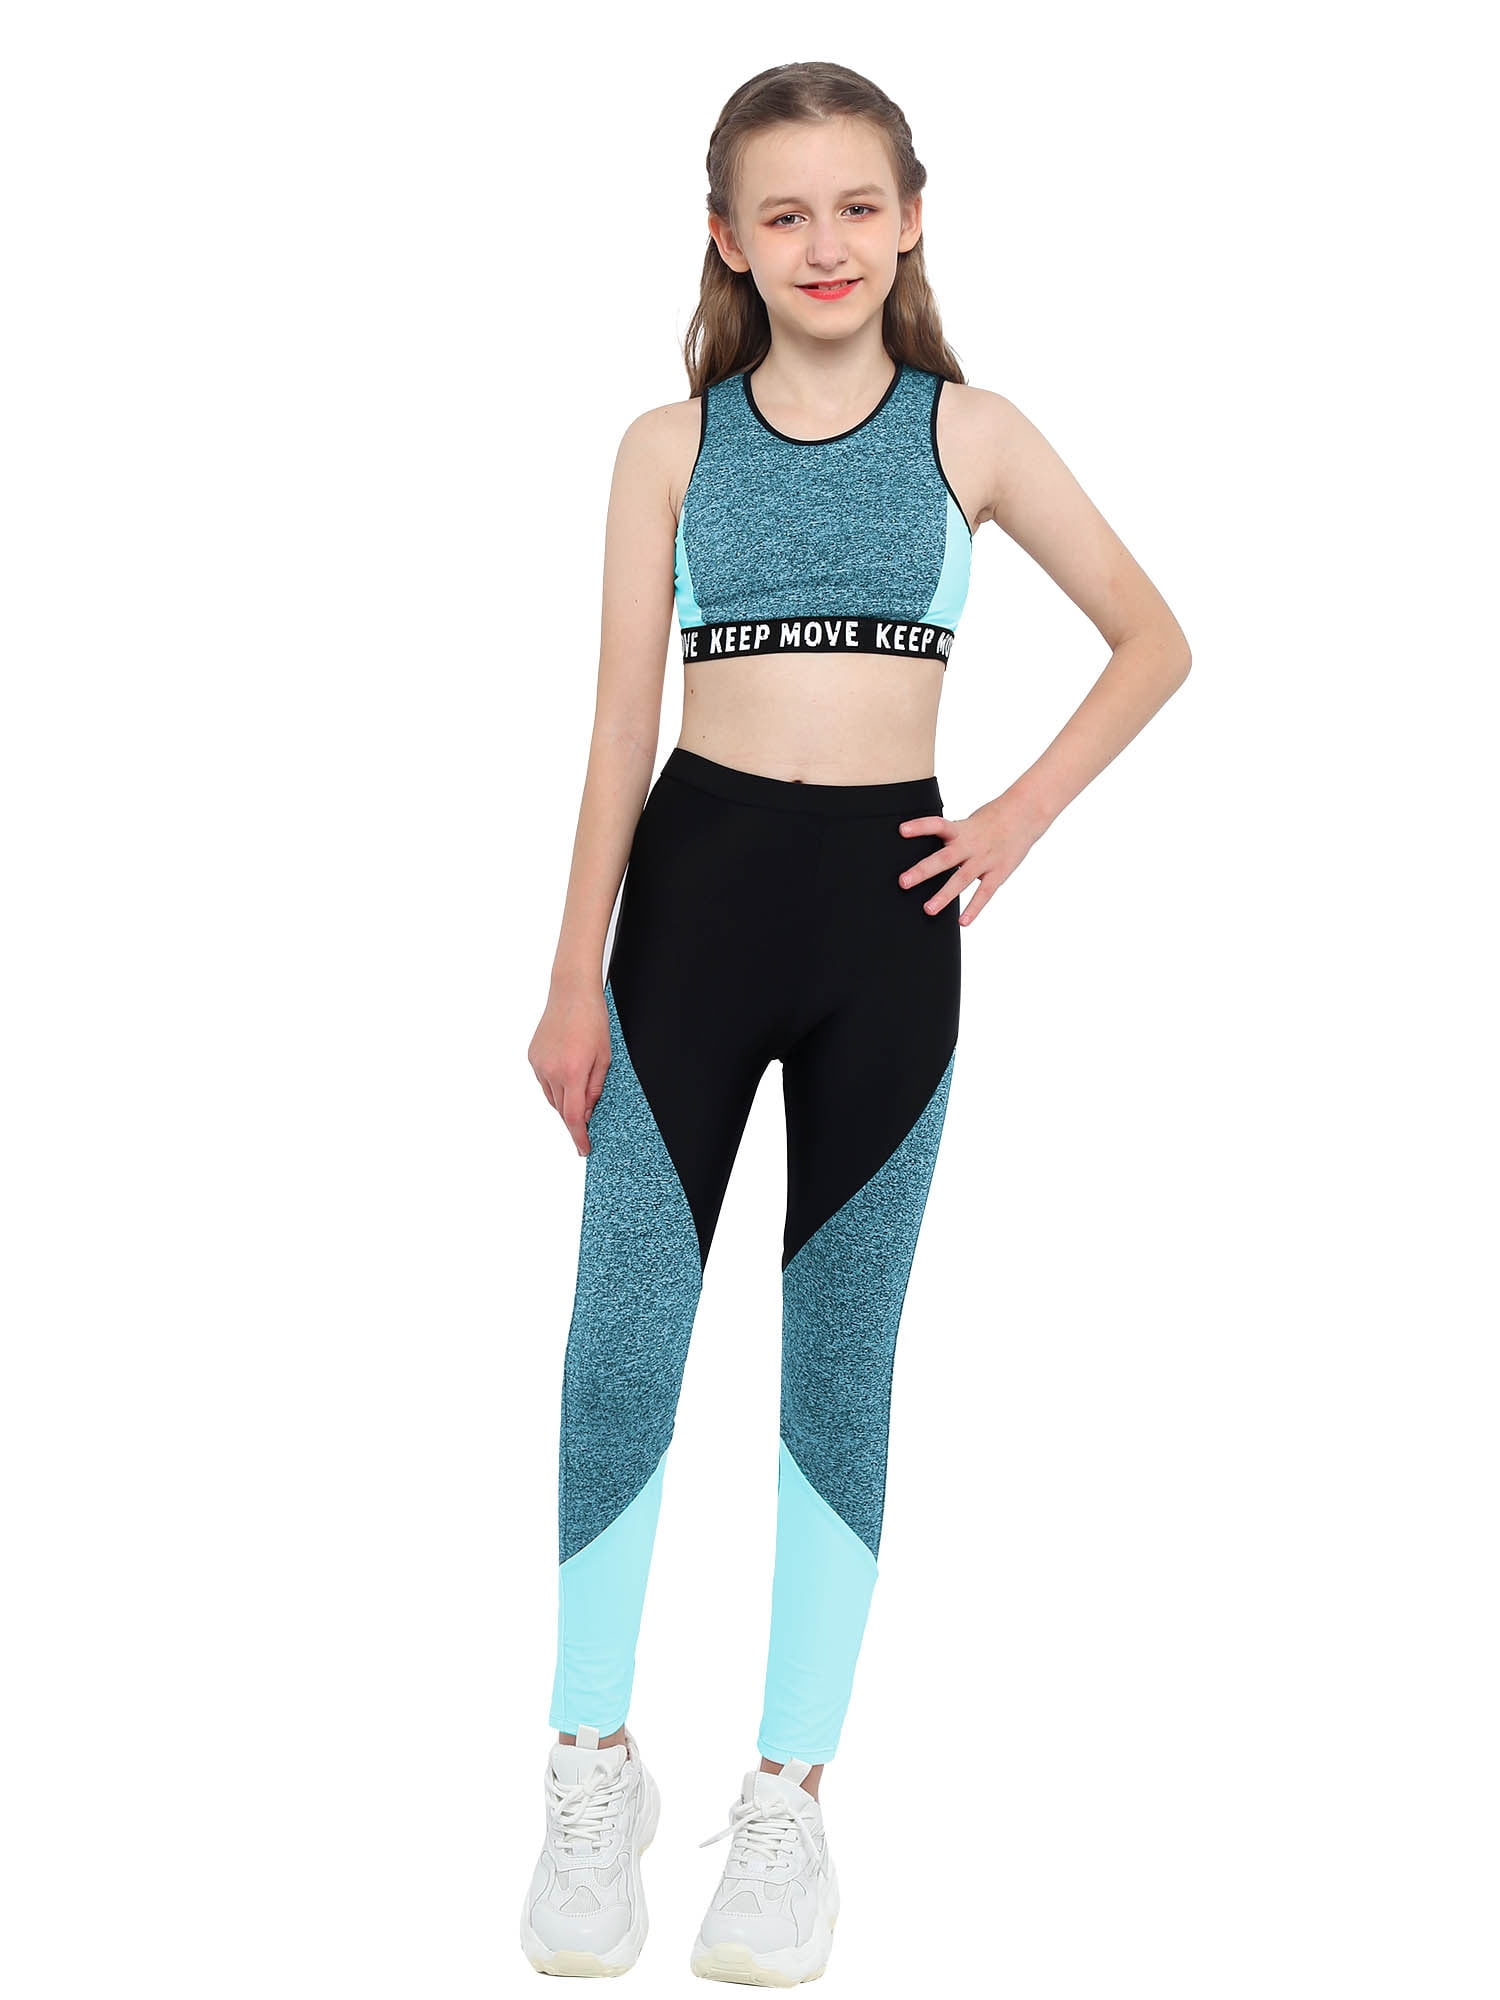 Aislor Kids Girls Two Piece Athletic Outfit Sports Bra Crop Top